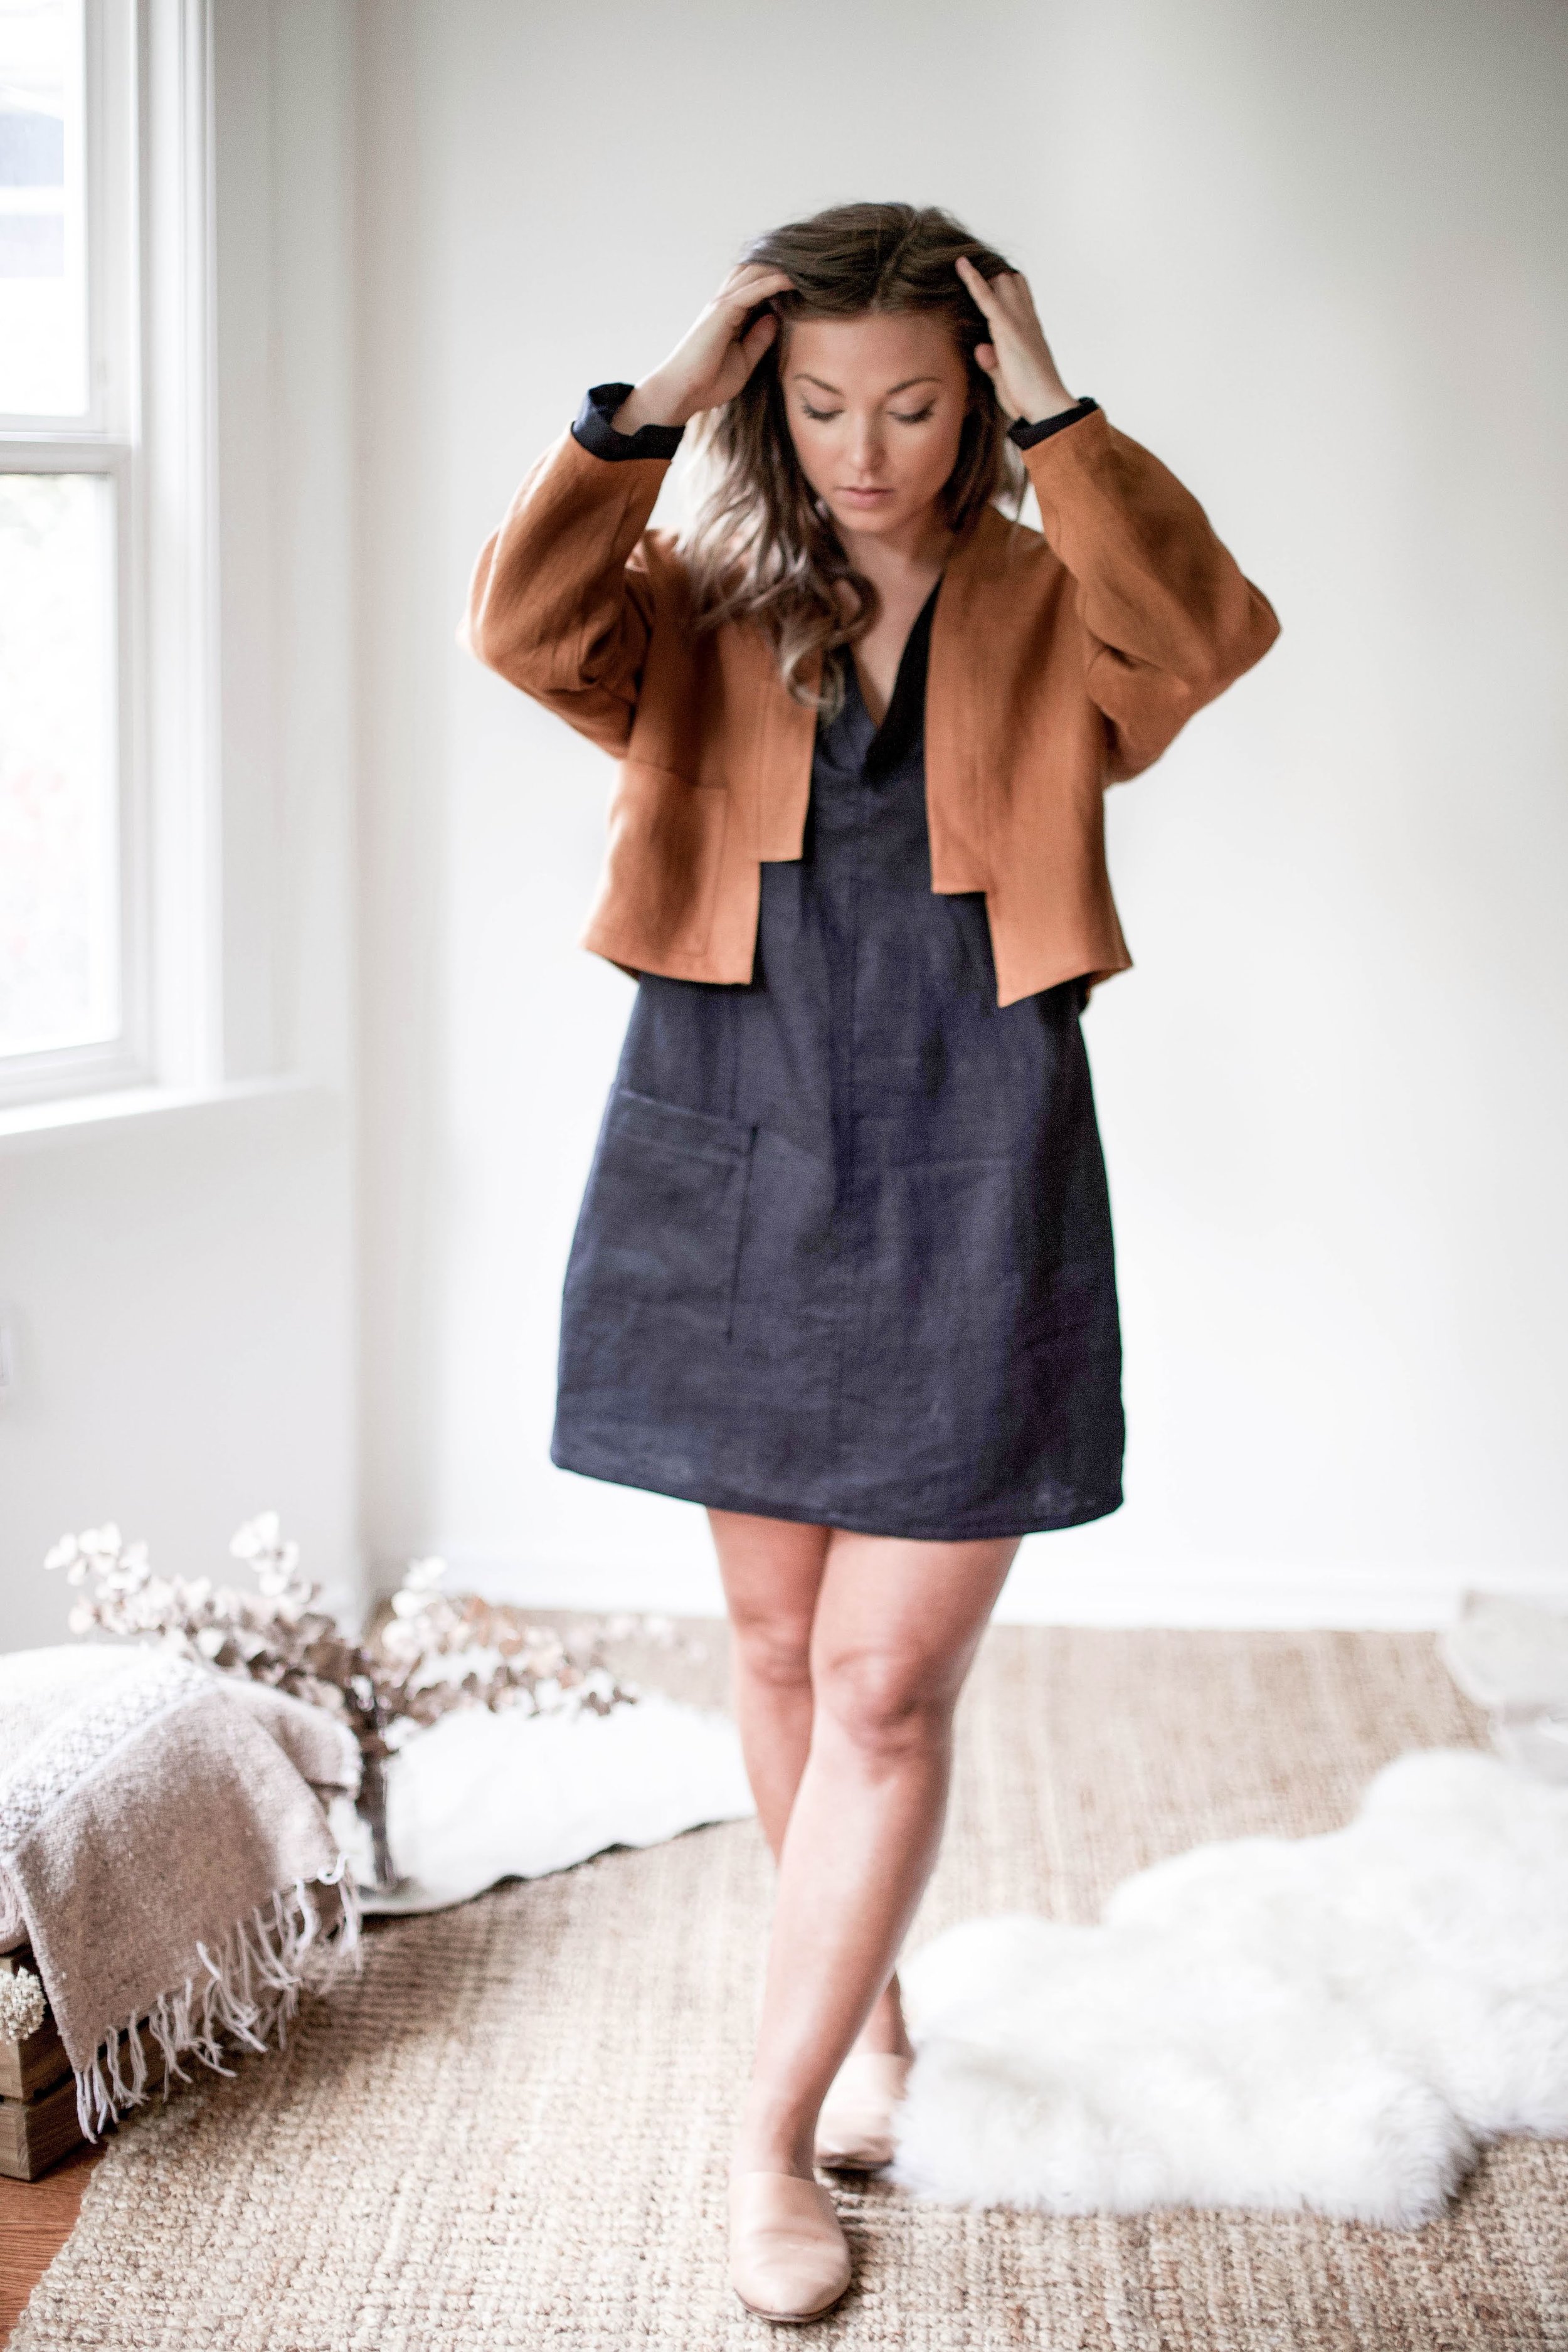 nomi-designs_ann-jacket_rust-colored-natural-linen-jacket_front-paired-with-ali-dress-and-mule-slides.jpg